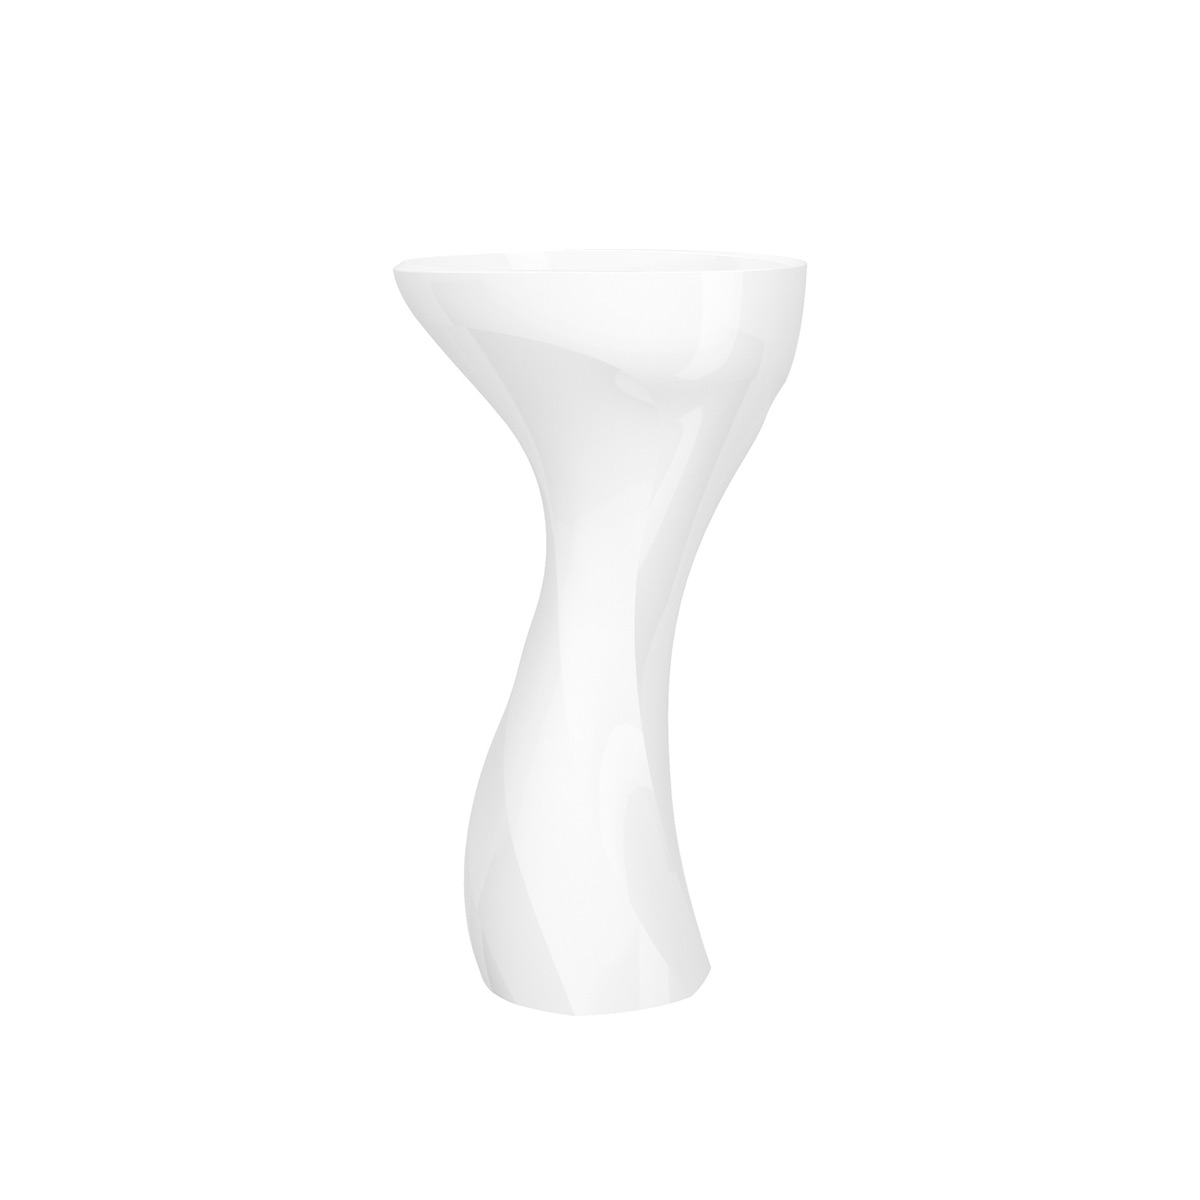 Victoria + Albert Seros 49 Pedestal Basin, sculpted wave design stone freestanding podium basin inspired by Sophie Elizabeth Thompson sculptures. Available in Gloss White and Matt White in bath, vessel basin and pedestal basin formats. Distributed in Australia by Luxe by Design, Brisbane.